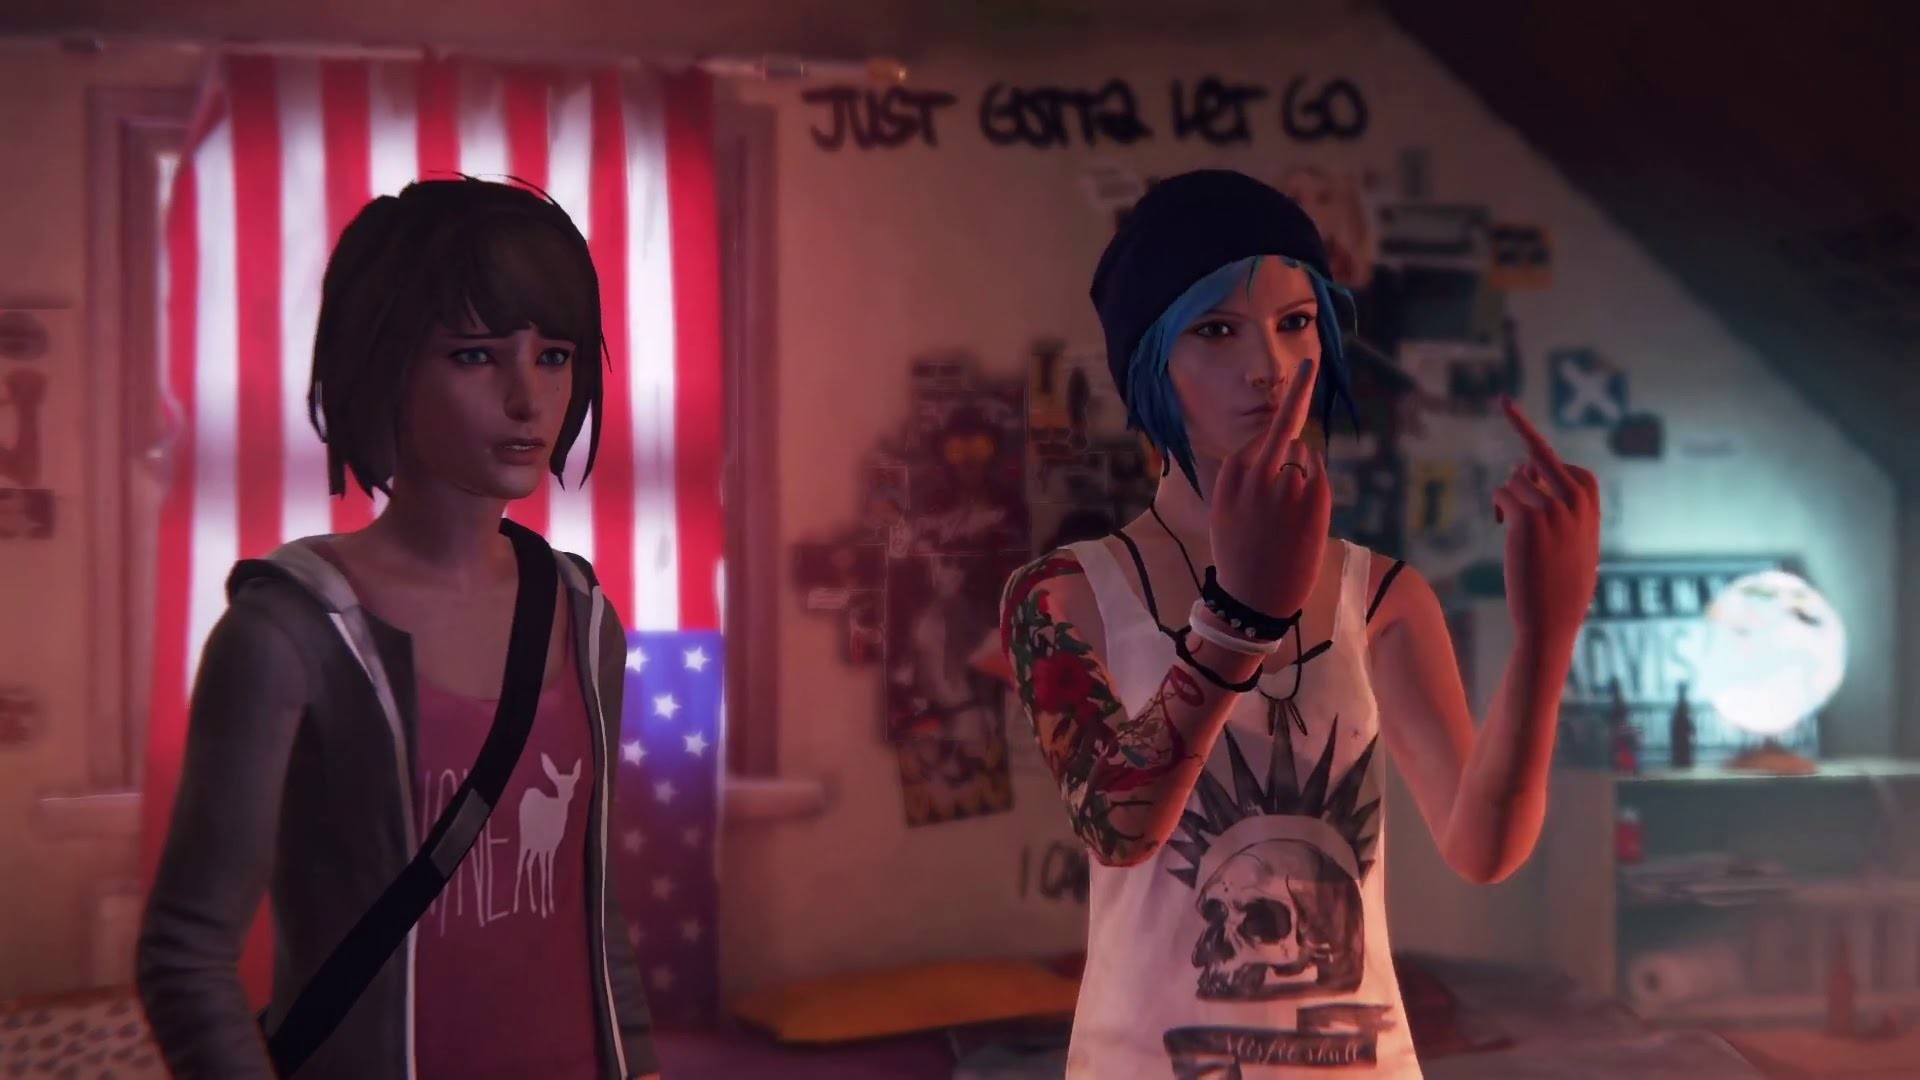 1920x1080 More wallpaper collections. 34 Wallpapers. life is strange wallpaper